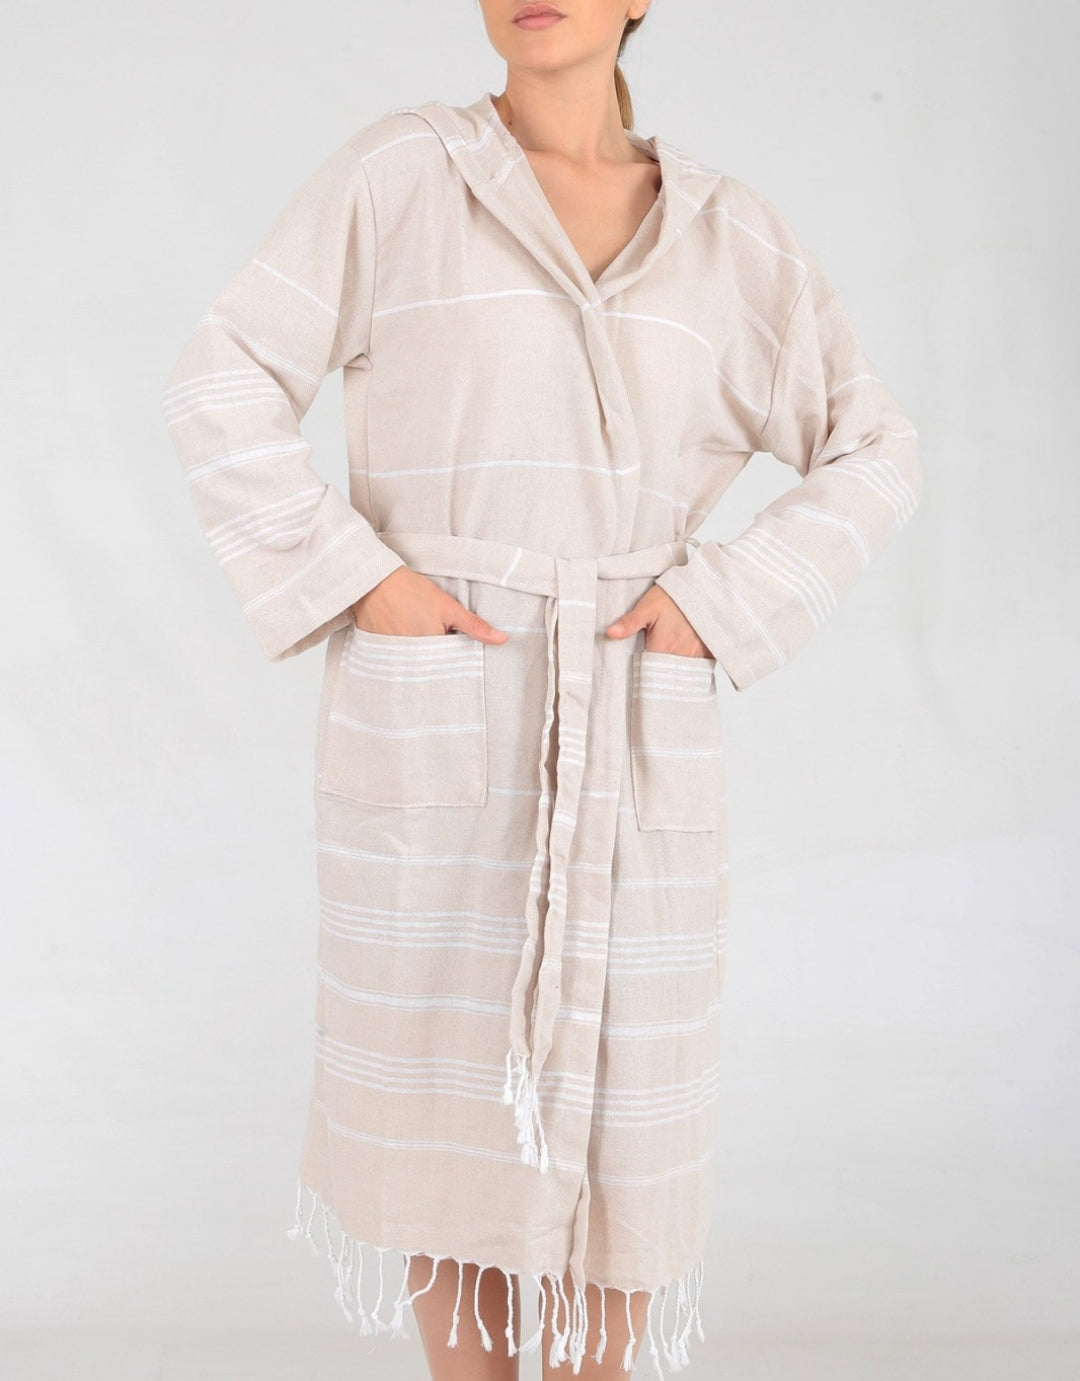 Summer Beach Robe- Hooded with Pockets and Tassels